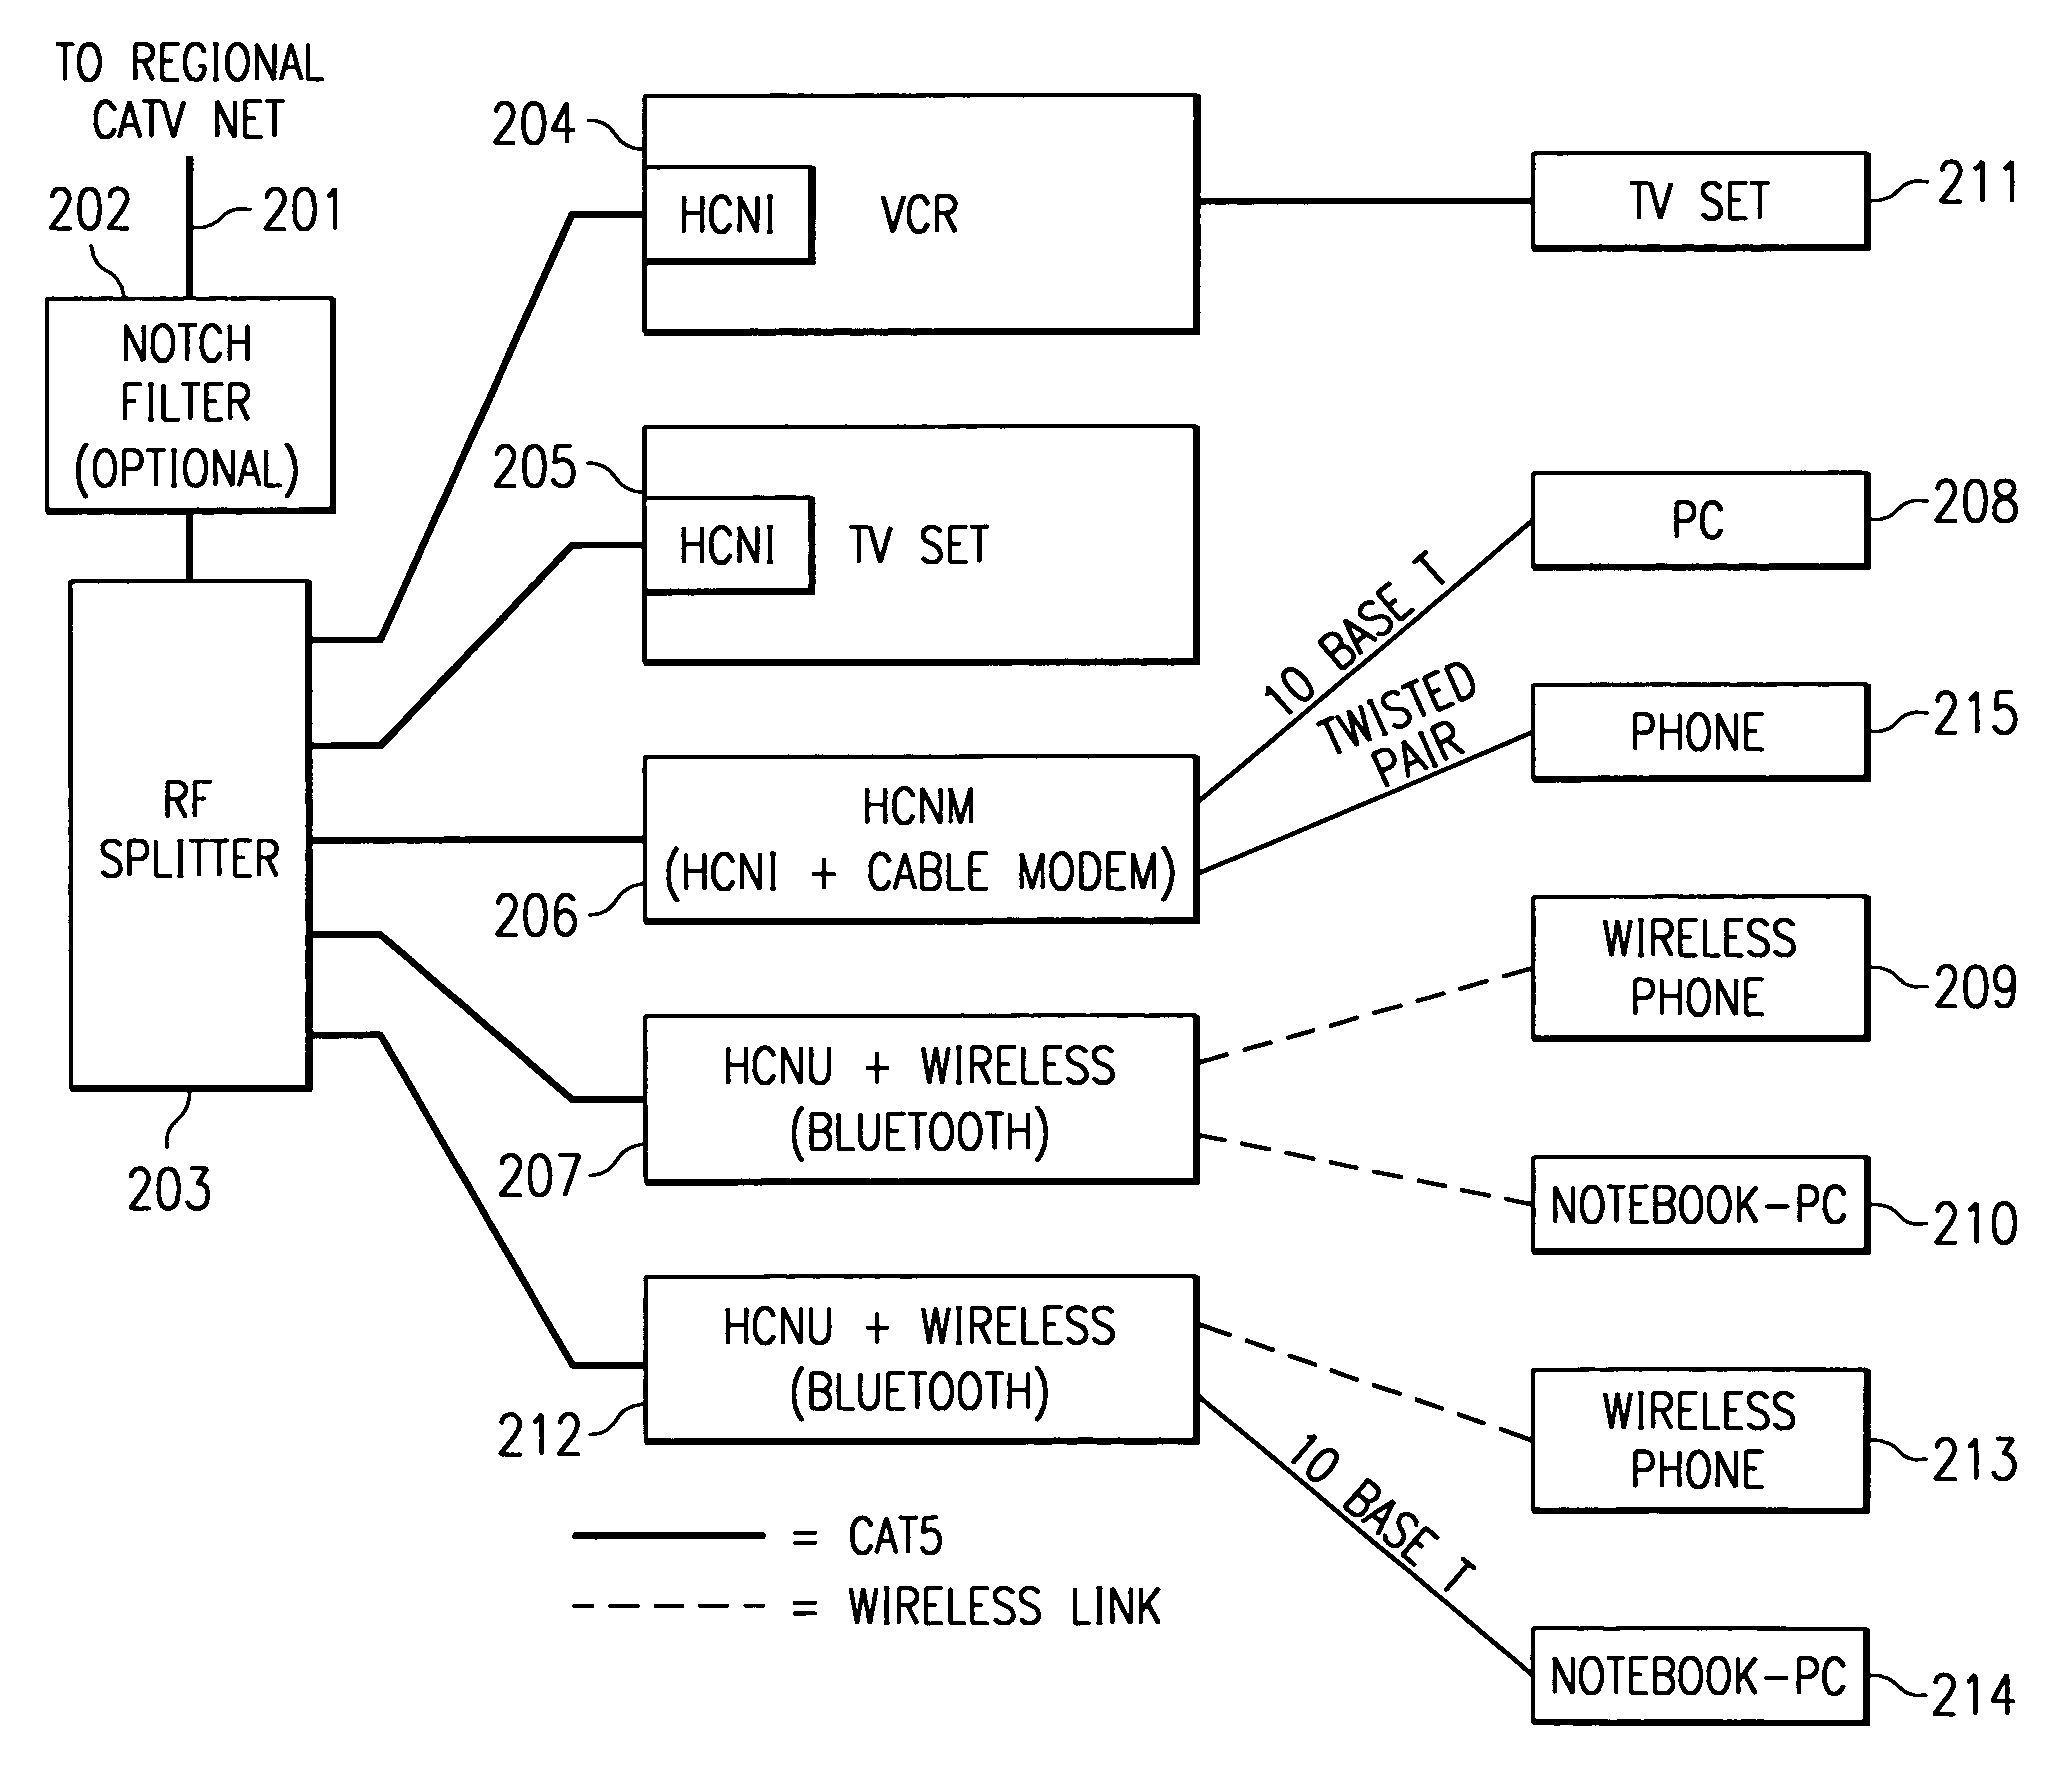 System and methods for home network communications